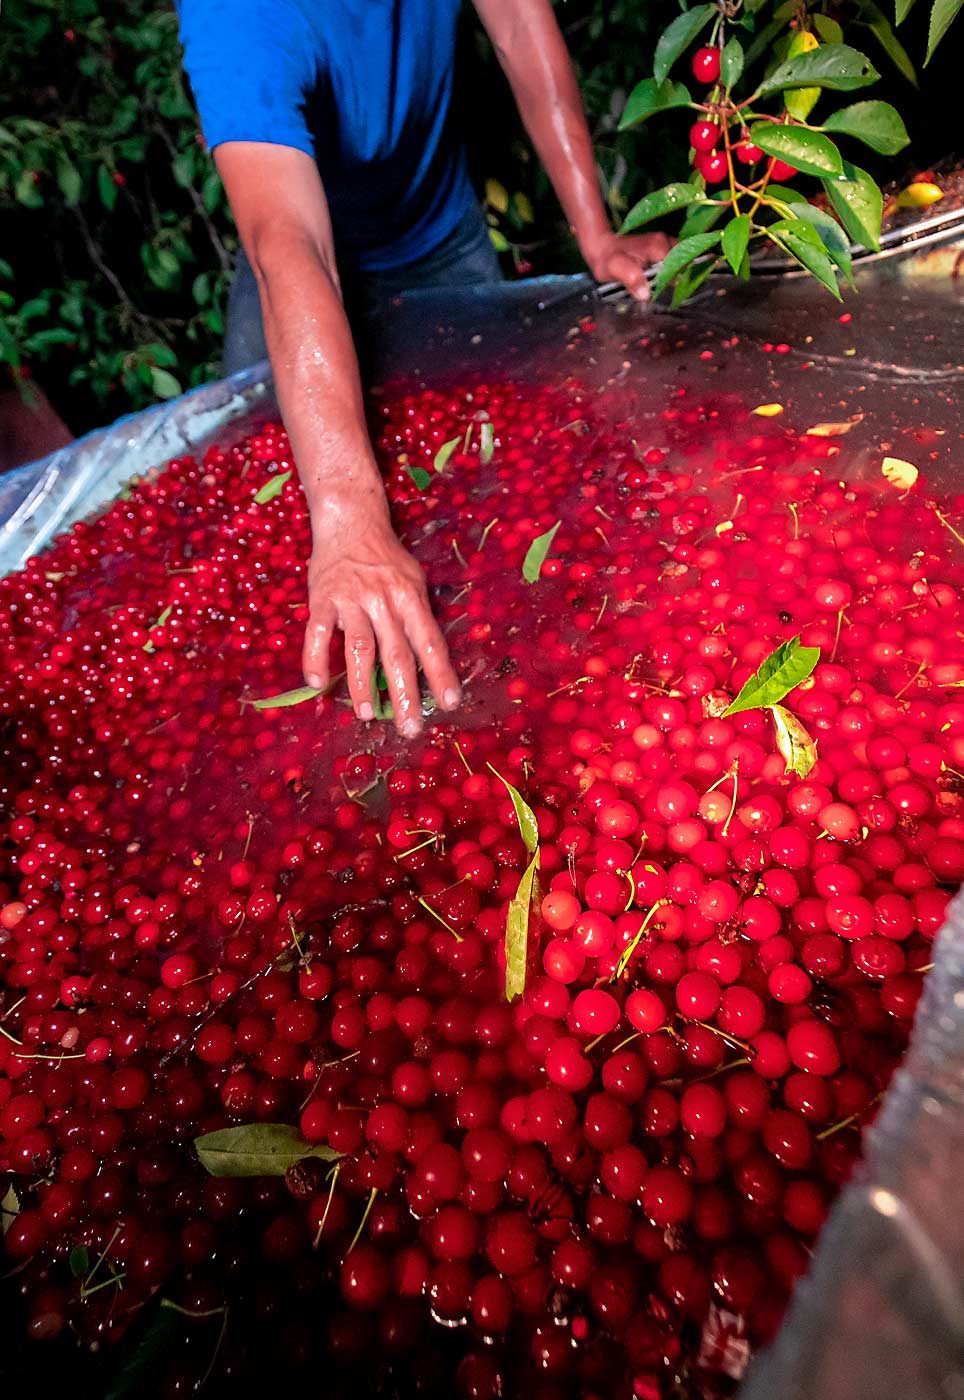 Harvested tart cherries brought in just 15 cents a pound on average in 2019, a price below the cost of production in many places. (TJ Mullinax/Good Fruit Grower)